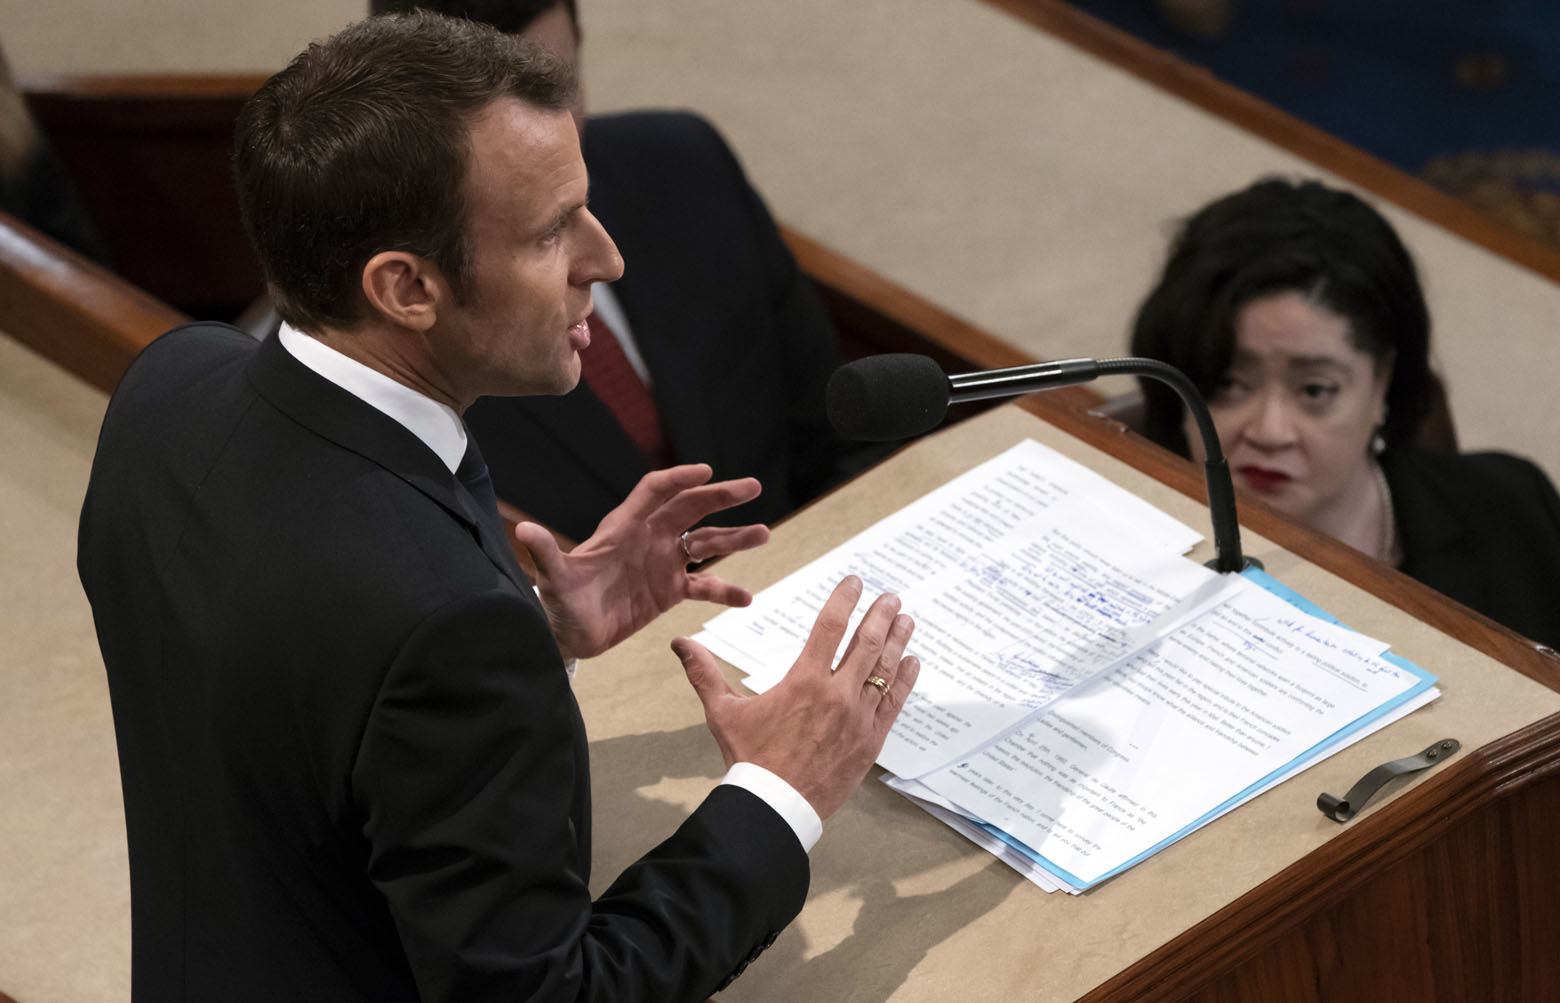 French President Emmanuel Macron speaks to a joint meeting of Congress at the Capitol in Washington, Wednesday, April 25, 2018. Macron urged the United States not to retreat from world affairs, but to embrace its historic role as a military leader of world affairs. (AP Photo/J. Scott Applewhite)